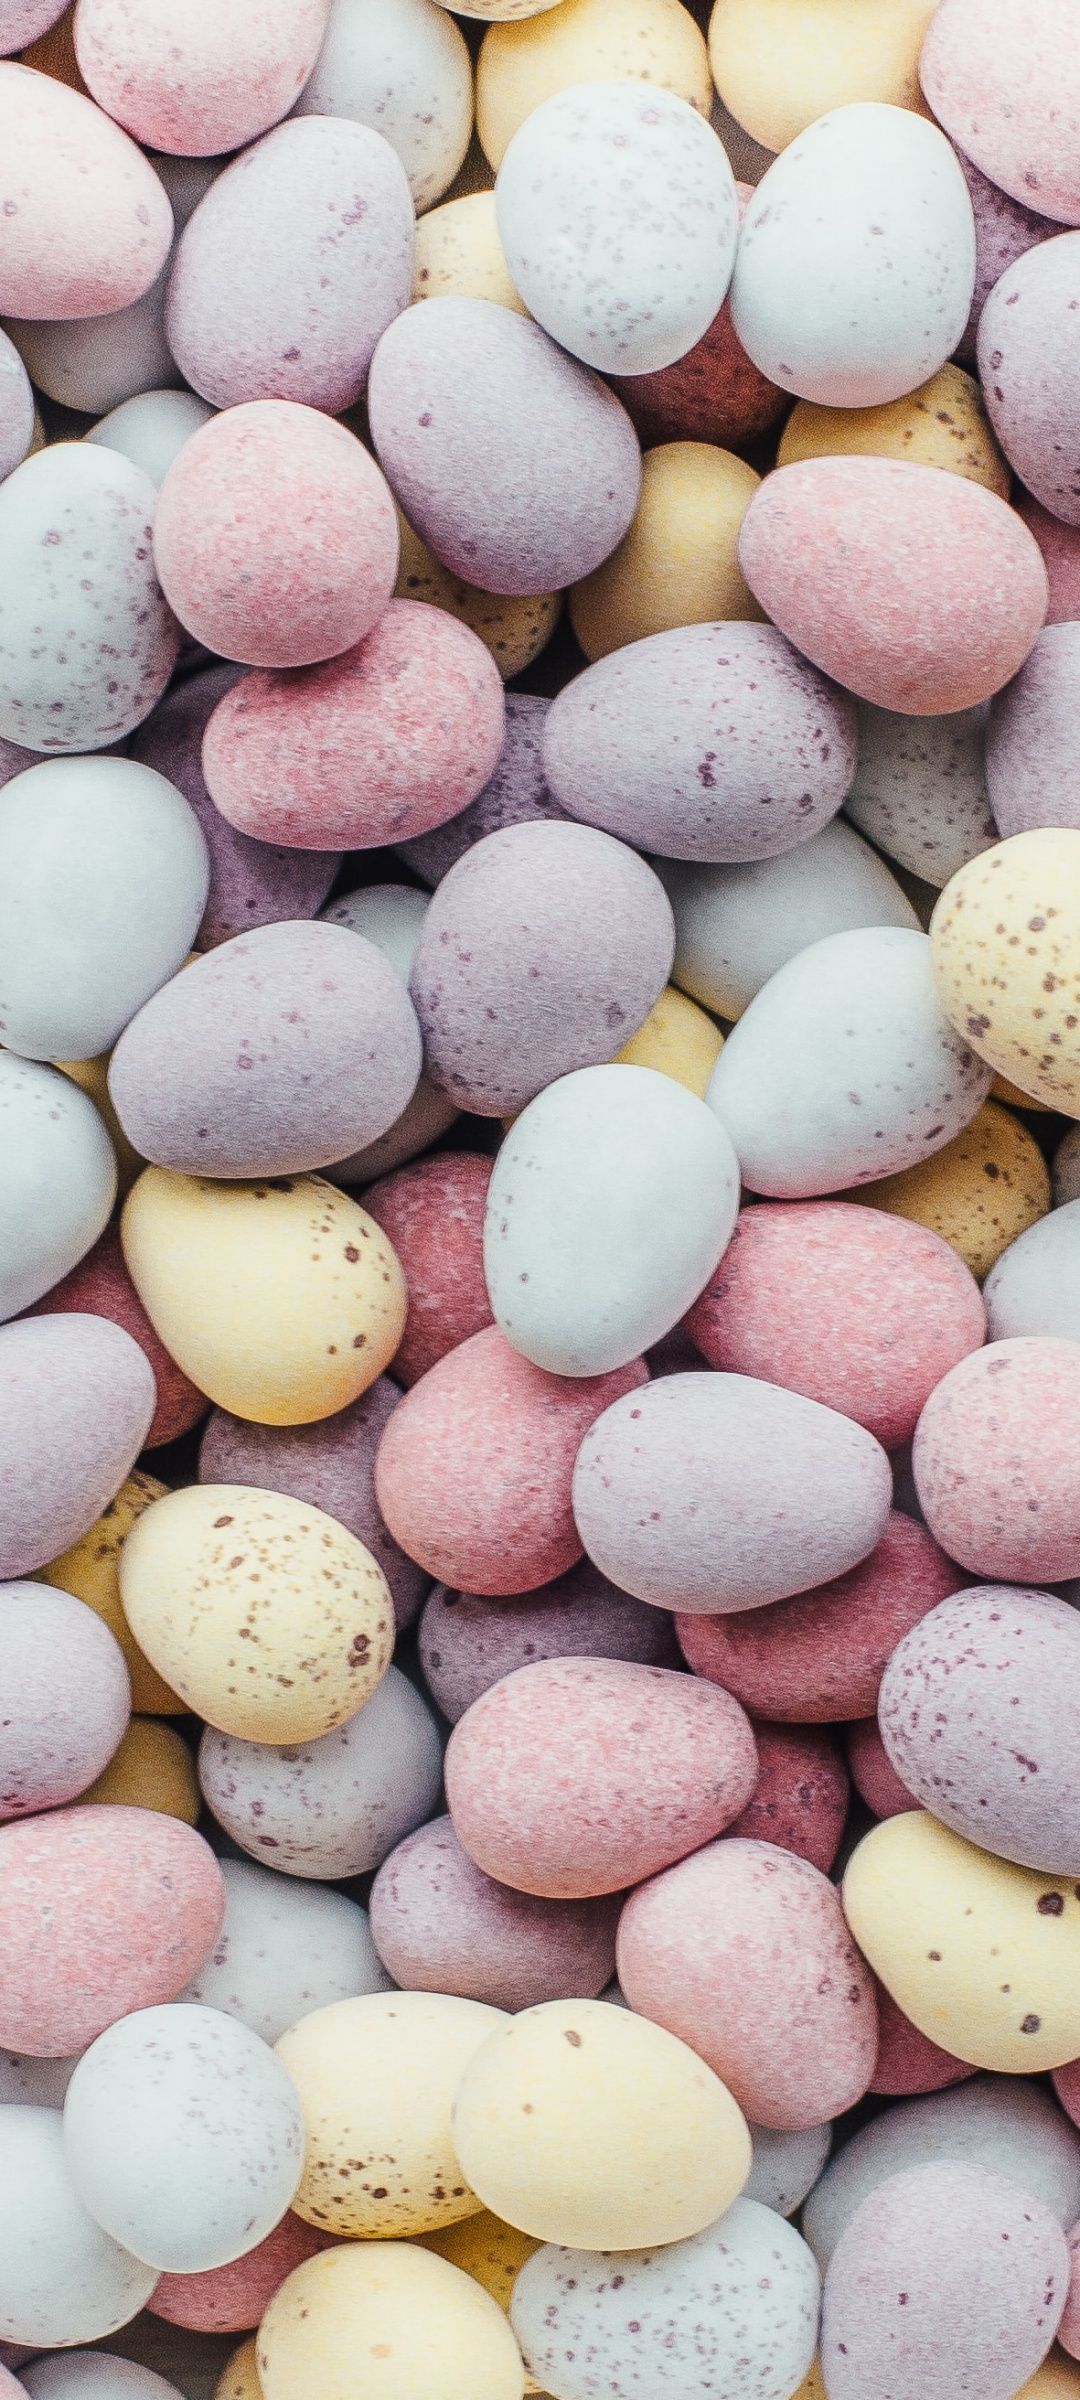 IPhone wallpaper of a pile of pastel Easter eggs. - Easter, egg